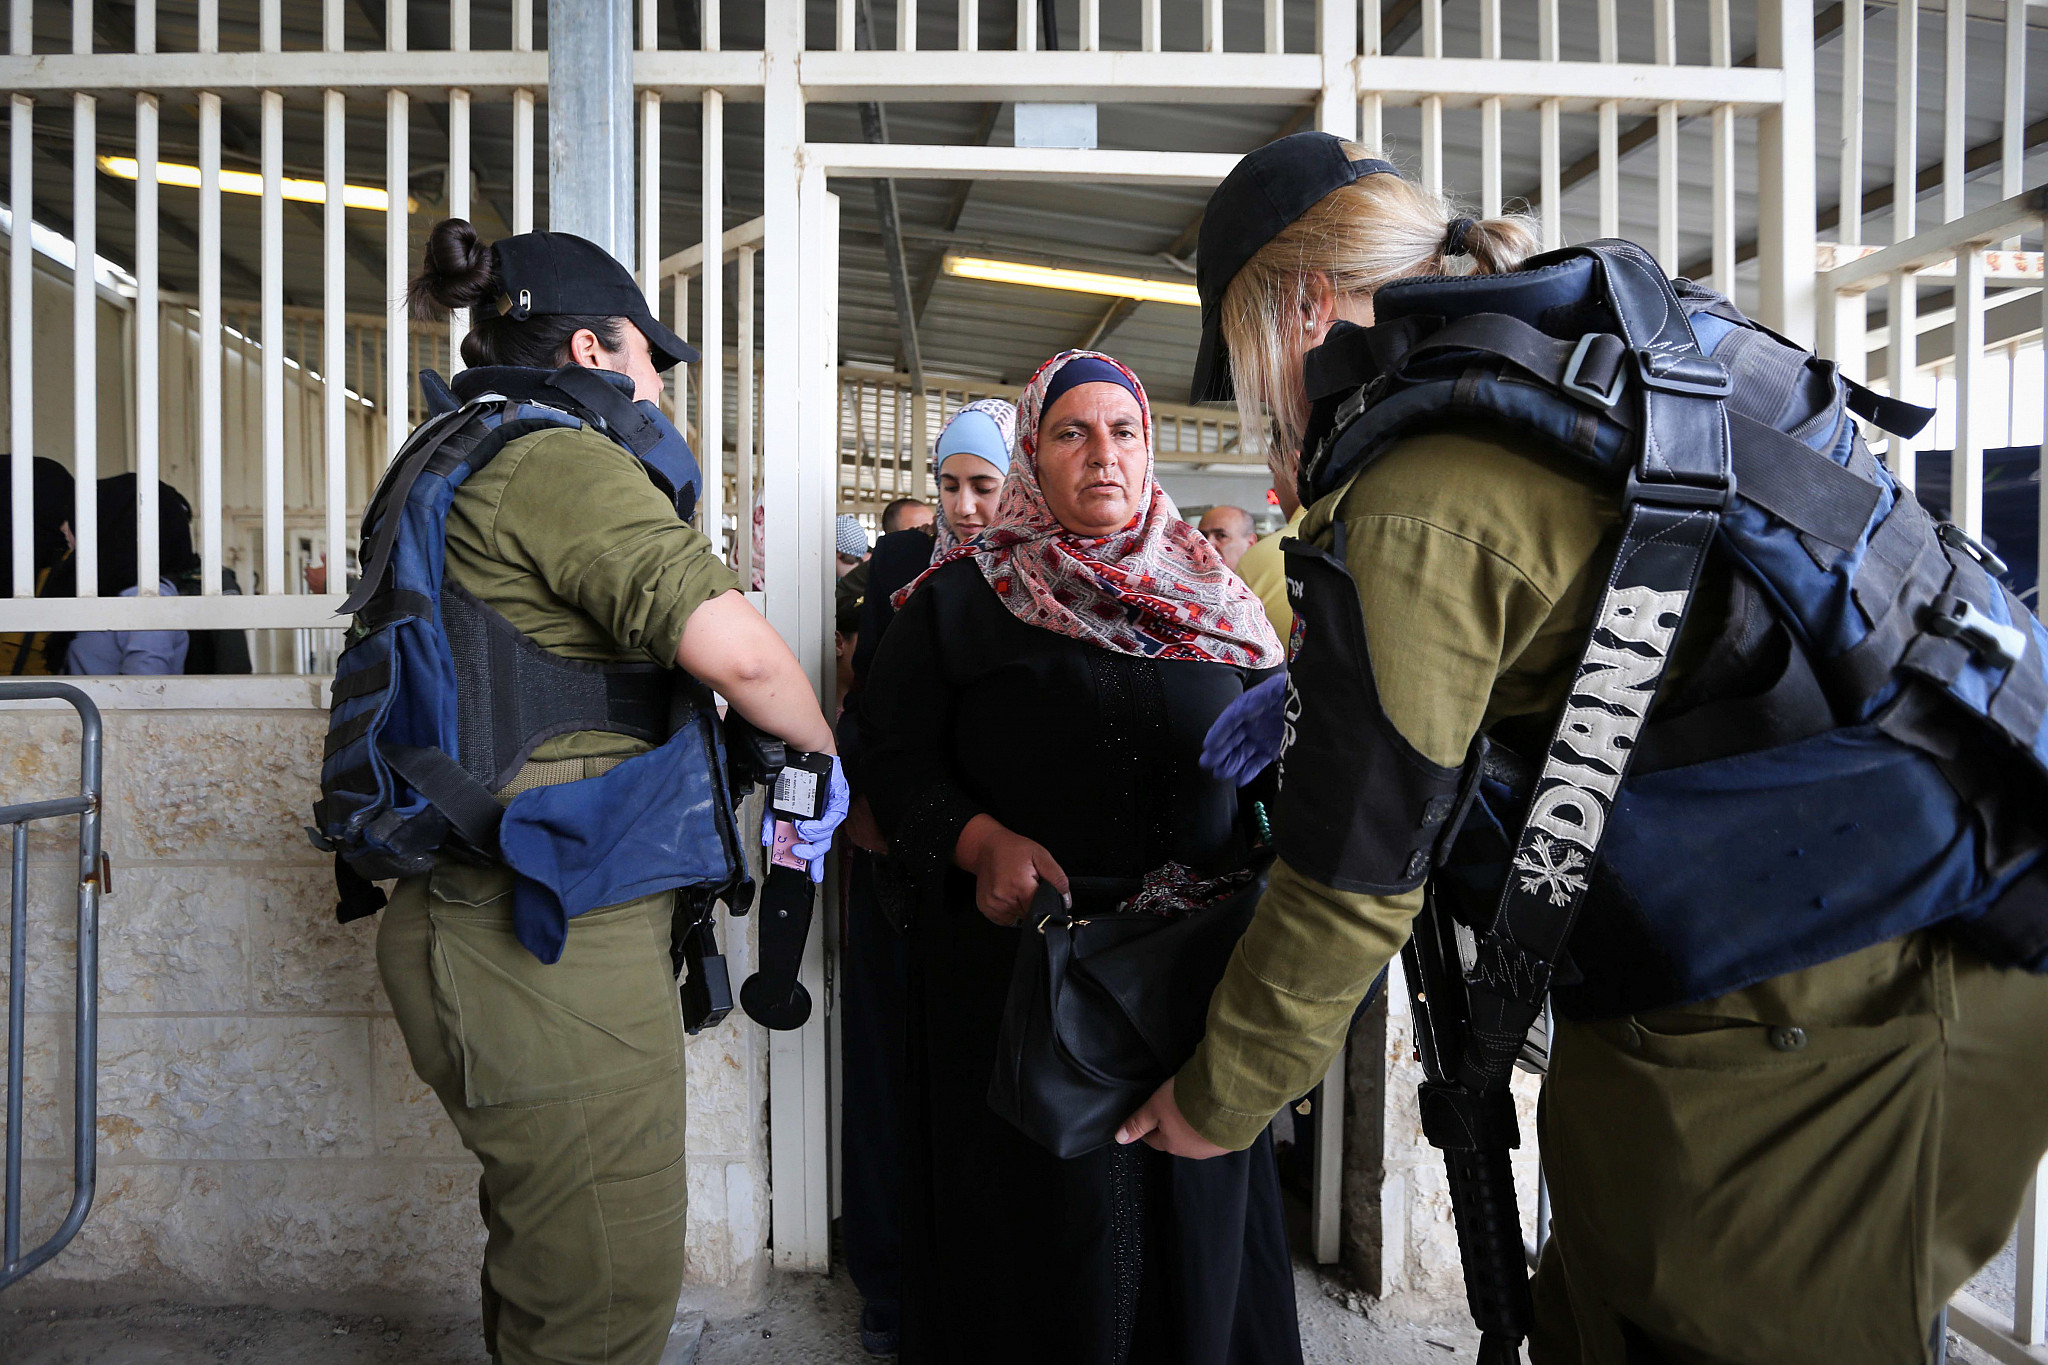 Palestinians make their way through an Israeli checkpoint to attend Friday prayers in Jerusalem's Al-Aqsa mosque, near the West Bank city of Bethlehem, on May 24, 2019. (Wisam Hashlamoun/Flash90)